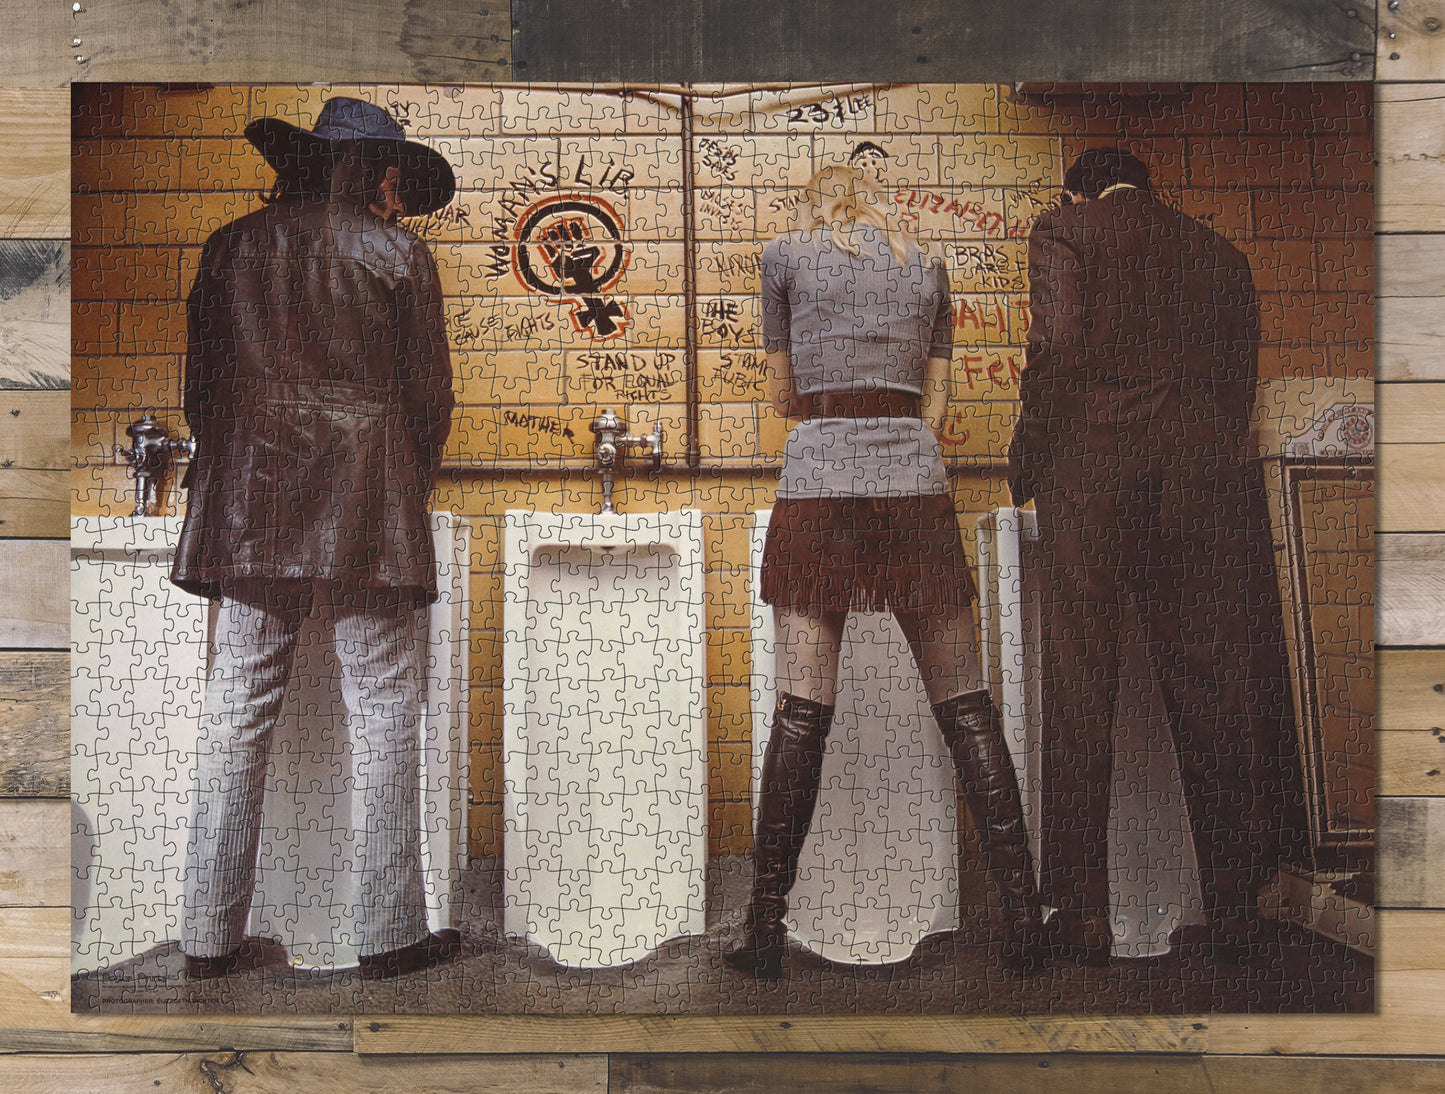 1000 piece puzzle Two men and a woman standing at urinals, with "woman's lib" graffiti on wall